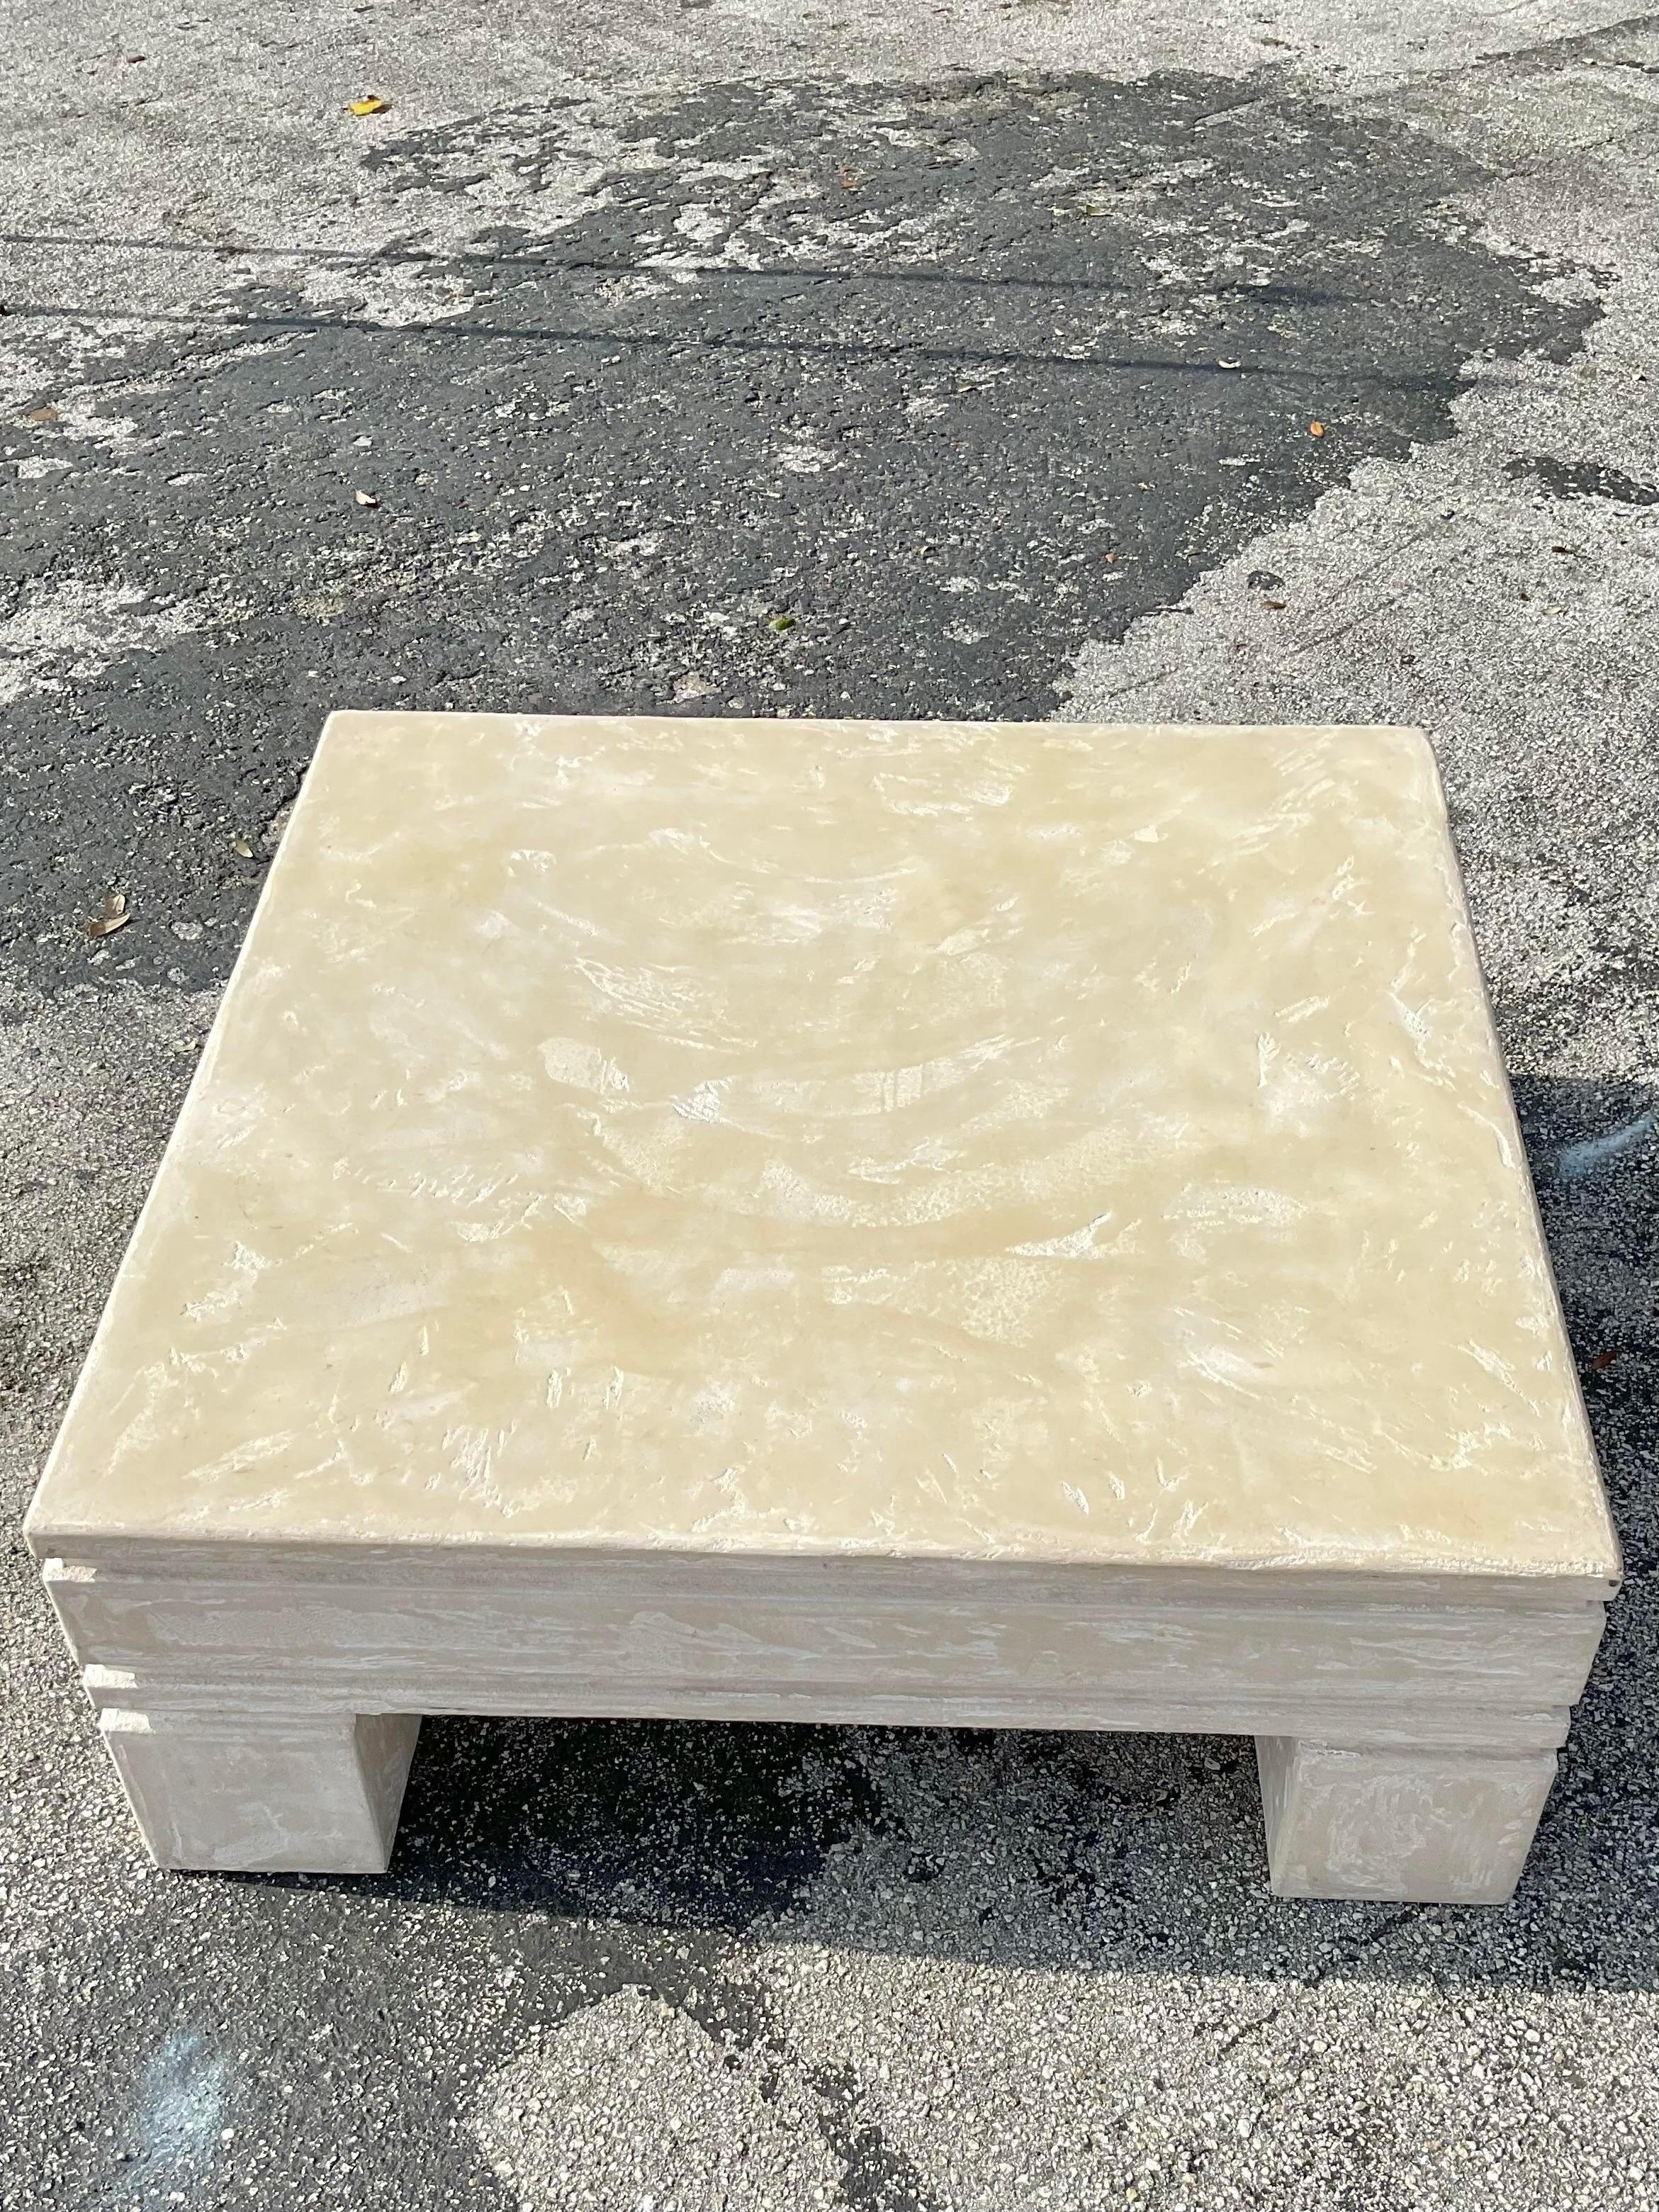 Mid 20th Century Vintage Plaster Block Style Square Coffee Table In Good Condition For Sale In west palm beach, FL